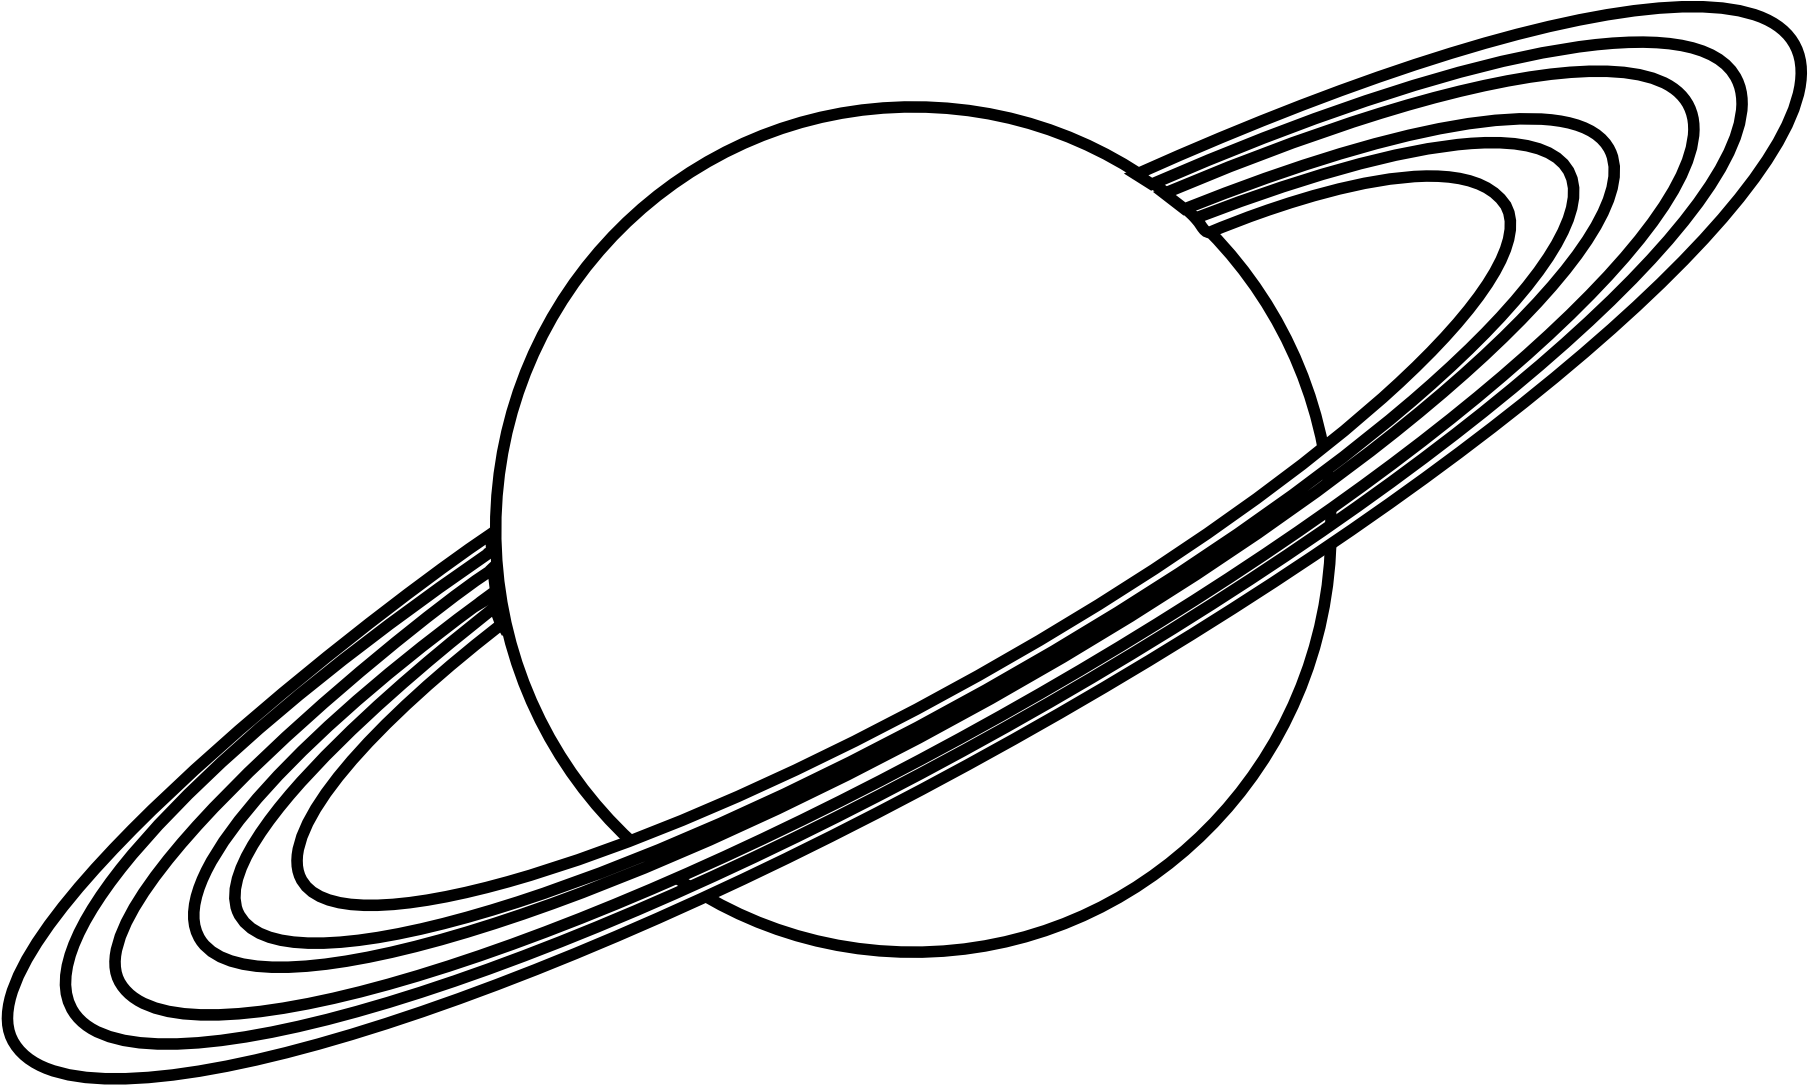 Attractive Planet Coloring Pages To Download And Print - Black And White Planet (1979x1183)